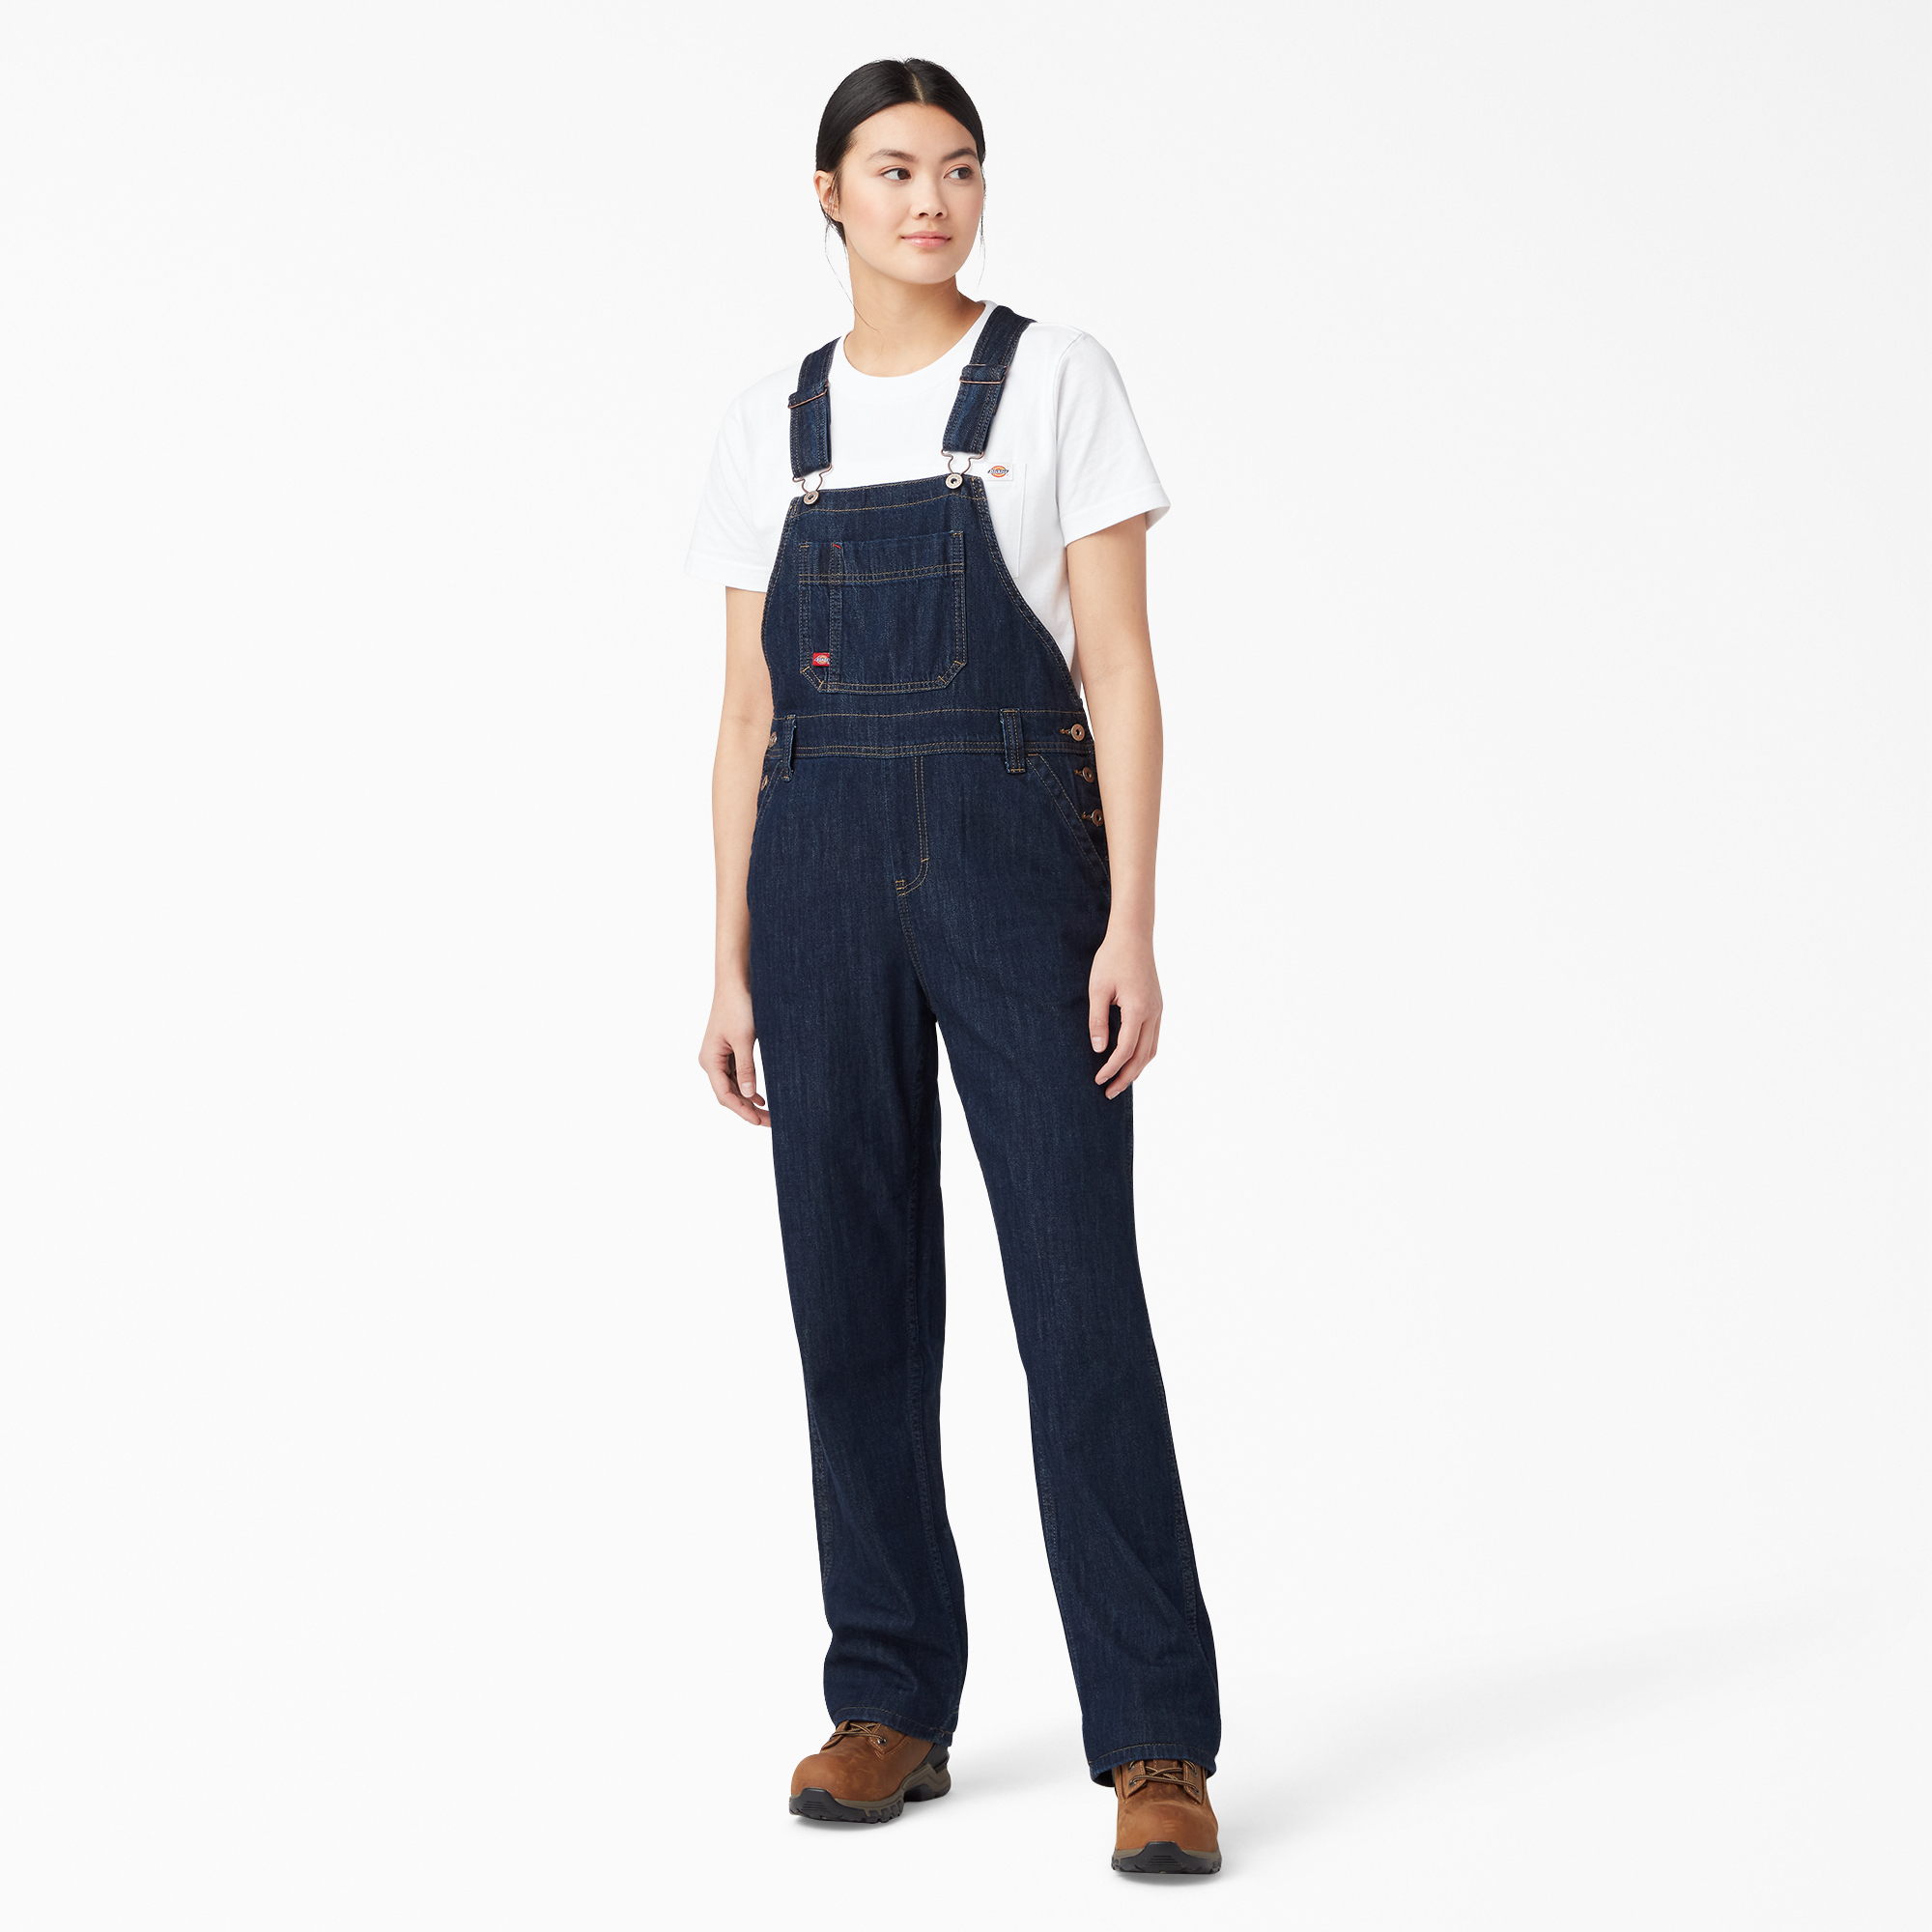 women's fitted overalls